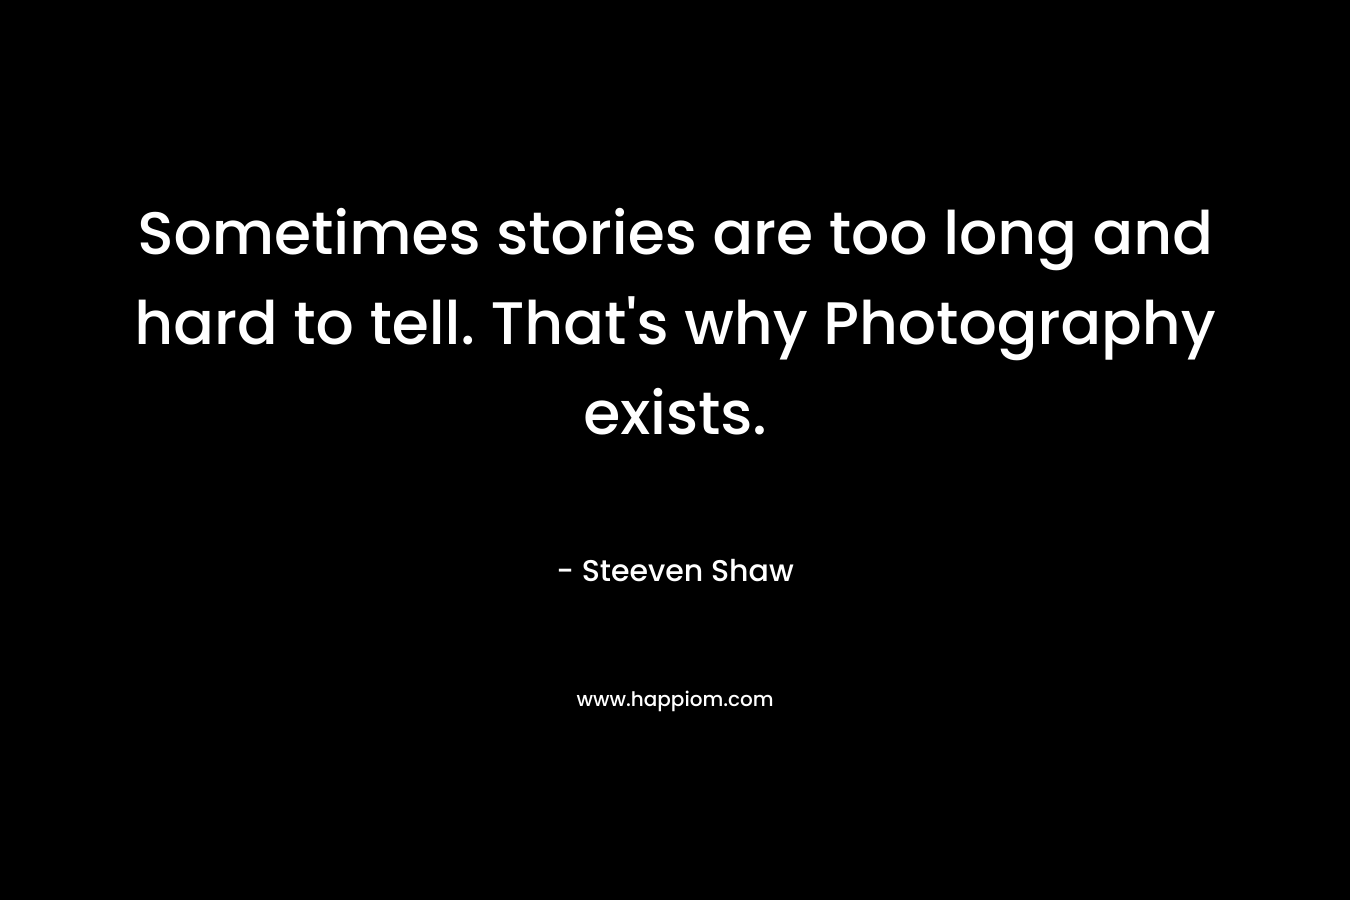 Sometimes stories are too long and hard to tell. That’s why Photography exists. – Steeven Shaw